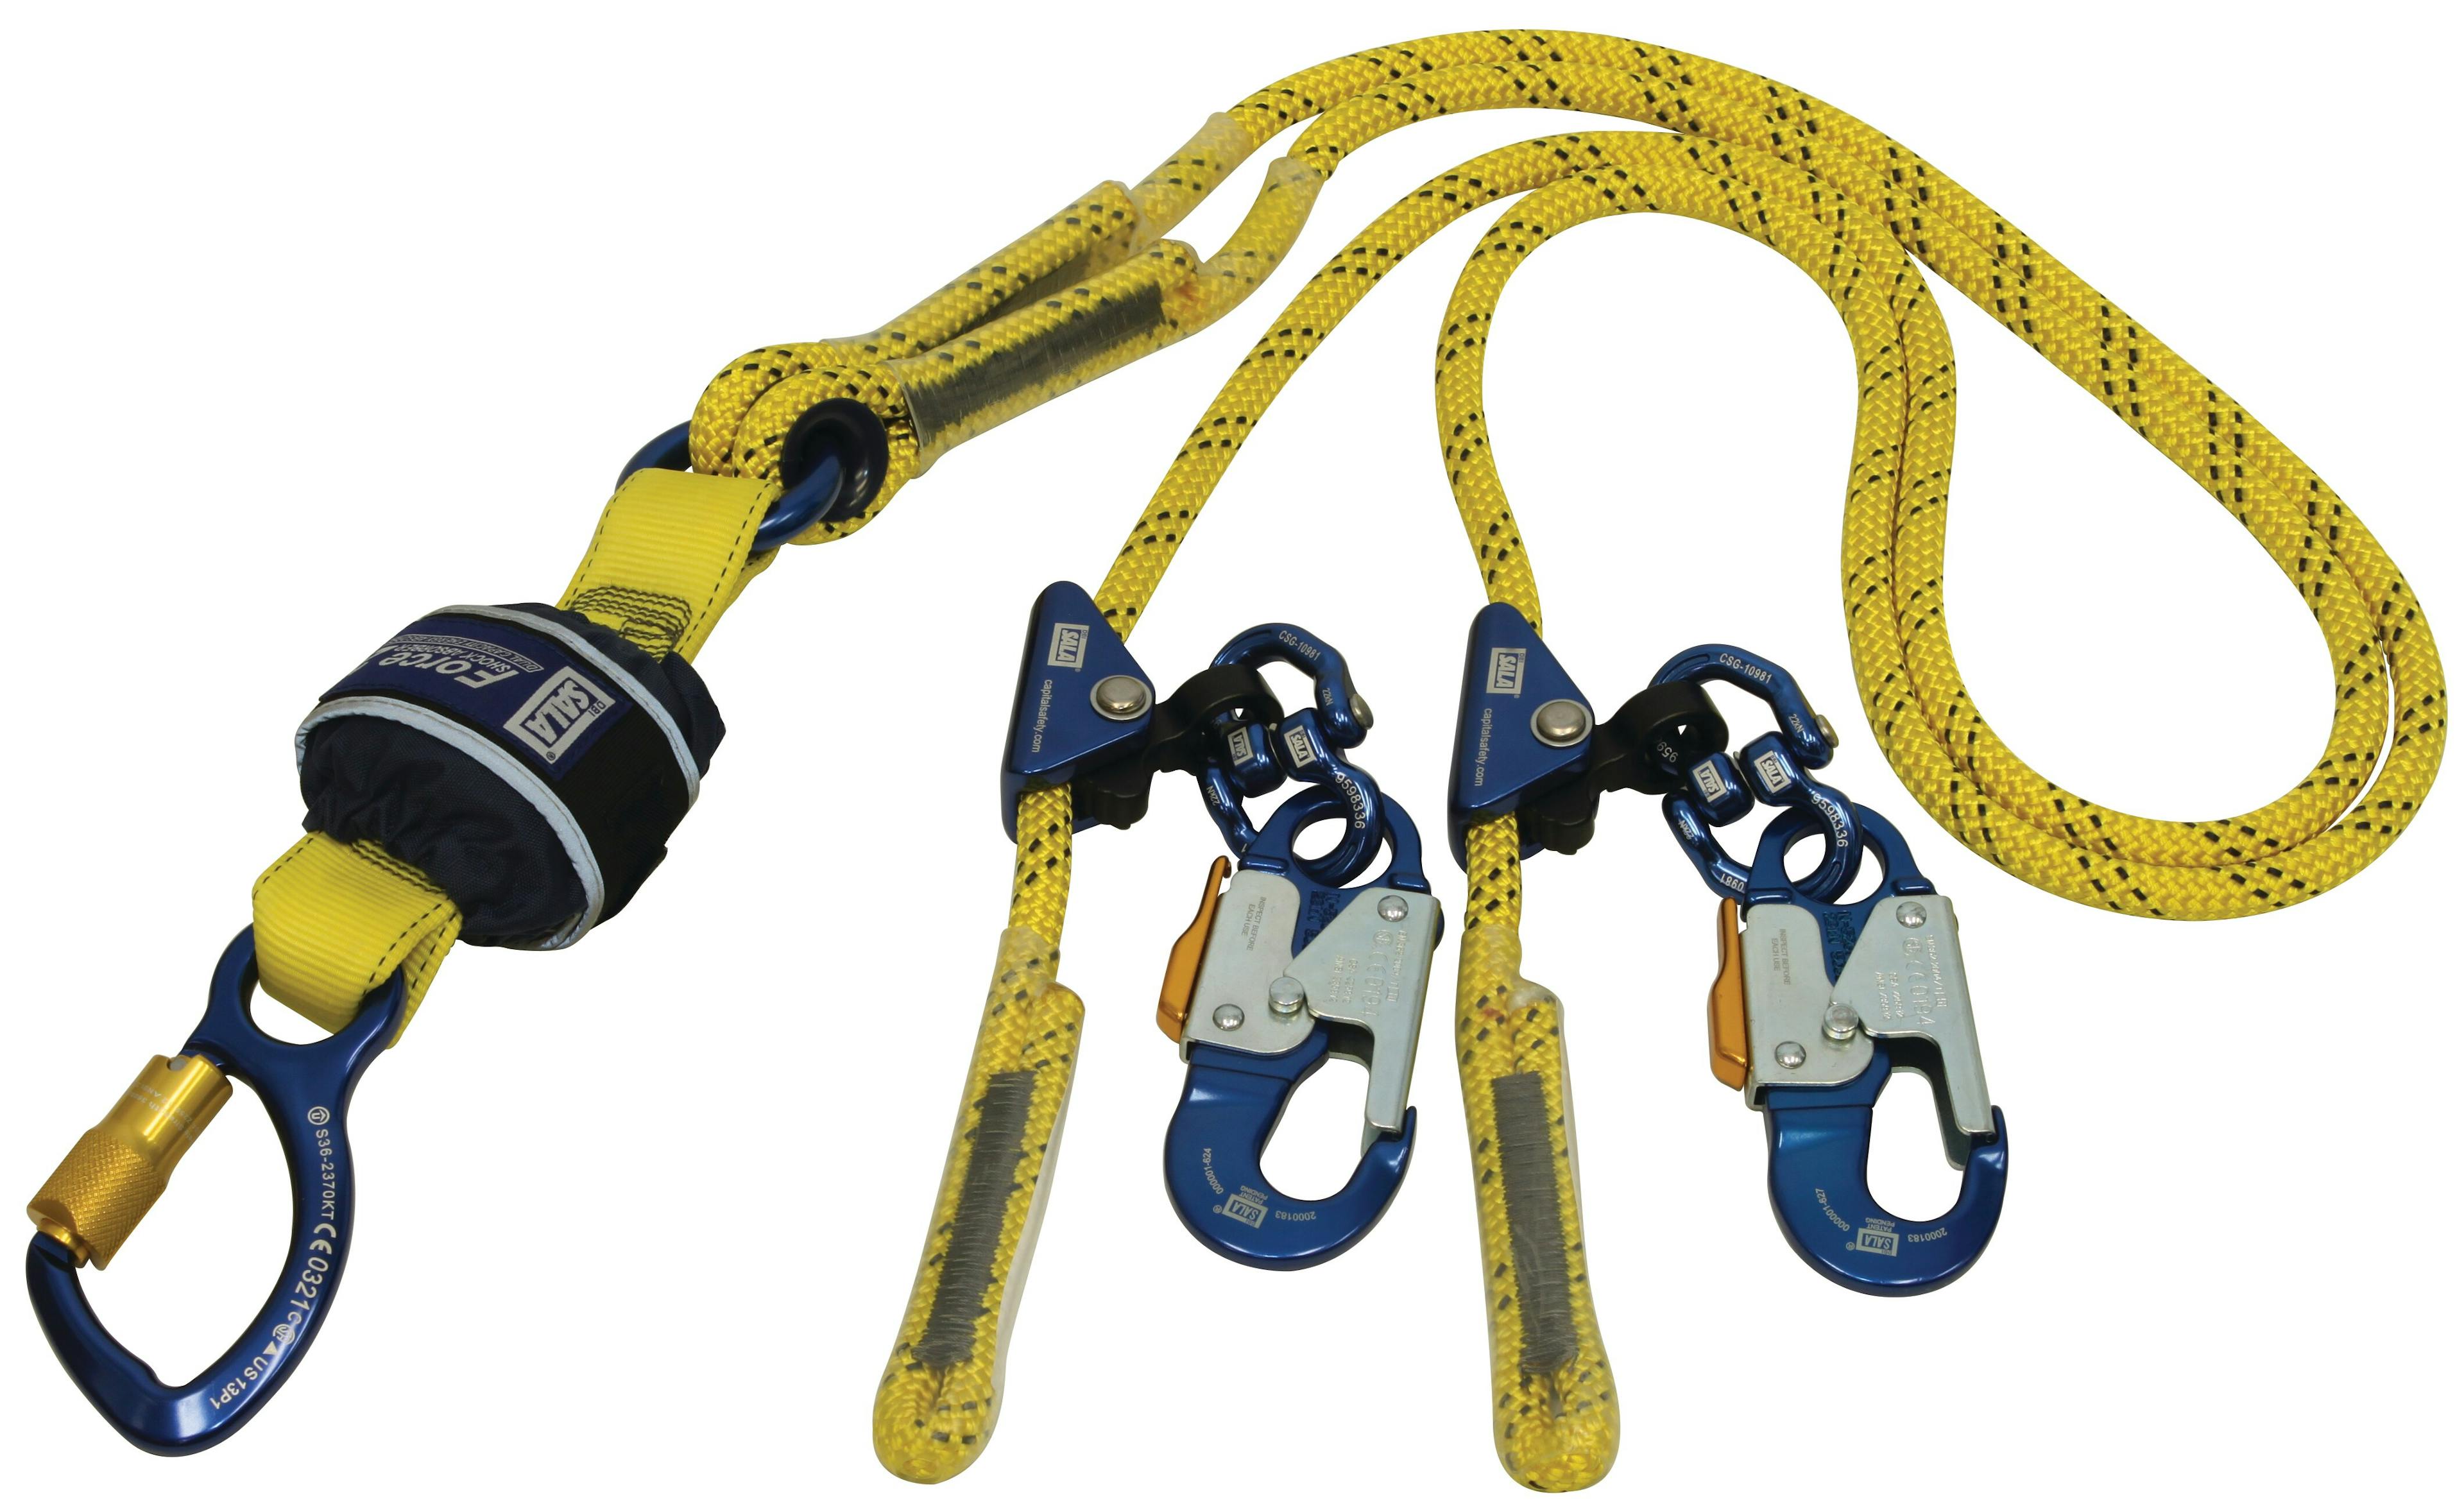 3M™ DBI-SALA® Force2™ Adjustable Shock Absorbing Kernmantle Rope Lanyard - Double Tail Z13206131R, Yellow with black fleck, 1 EA/Case